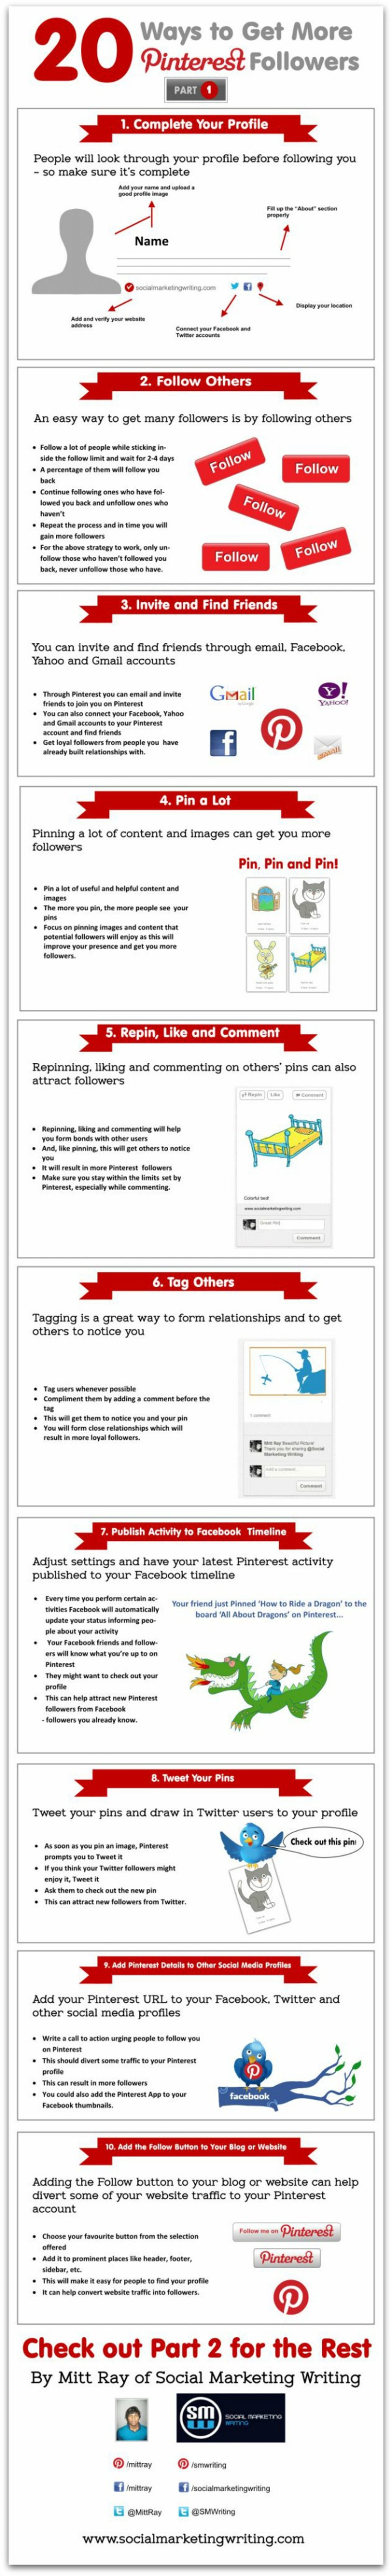 Infographic: 10 ways to get more followers on Pinterest - Ragan | The MarTech Digest | Scoop.it